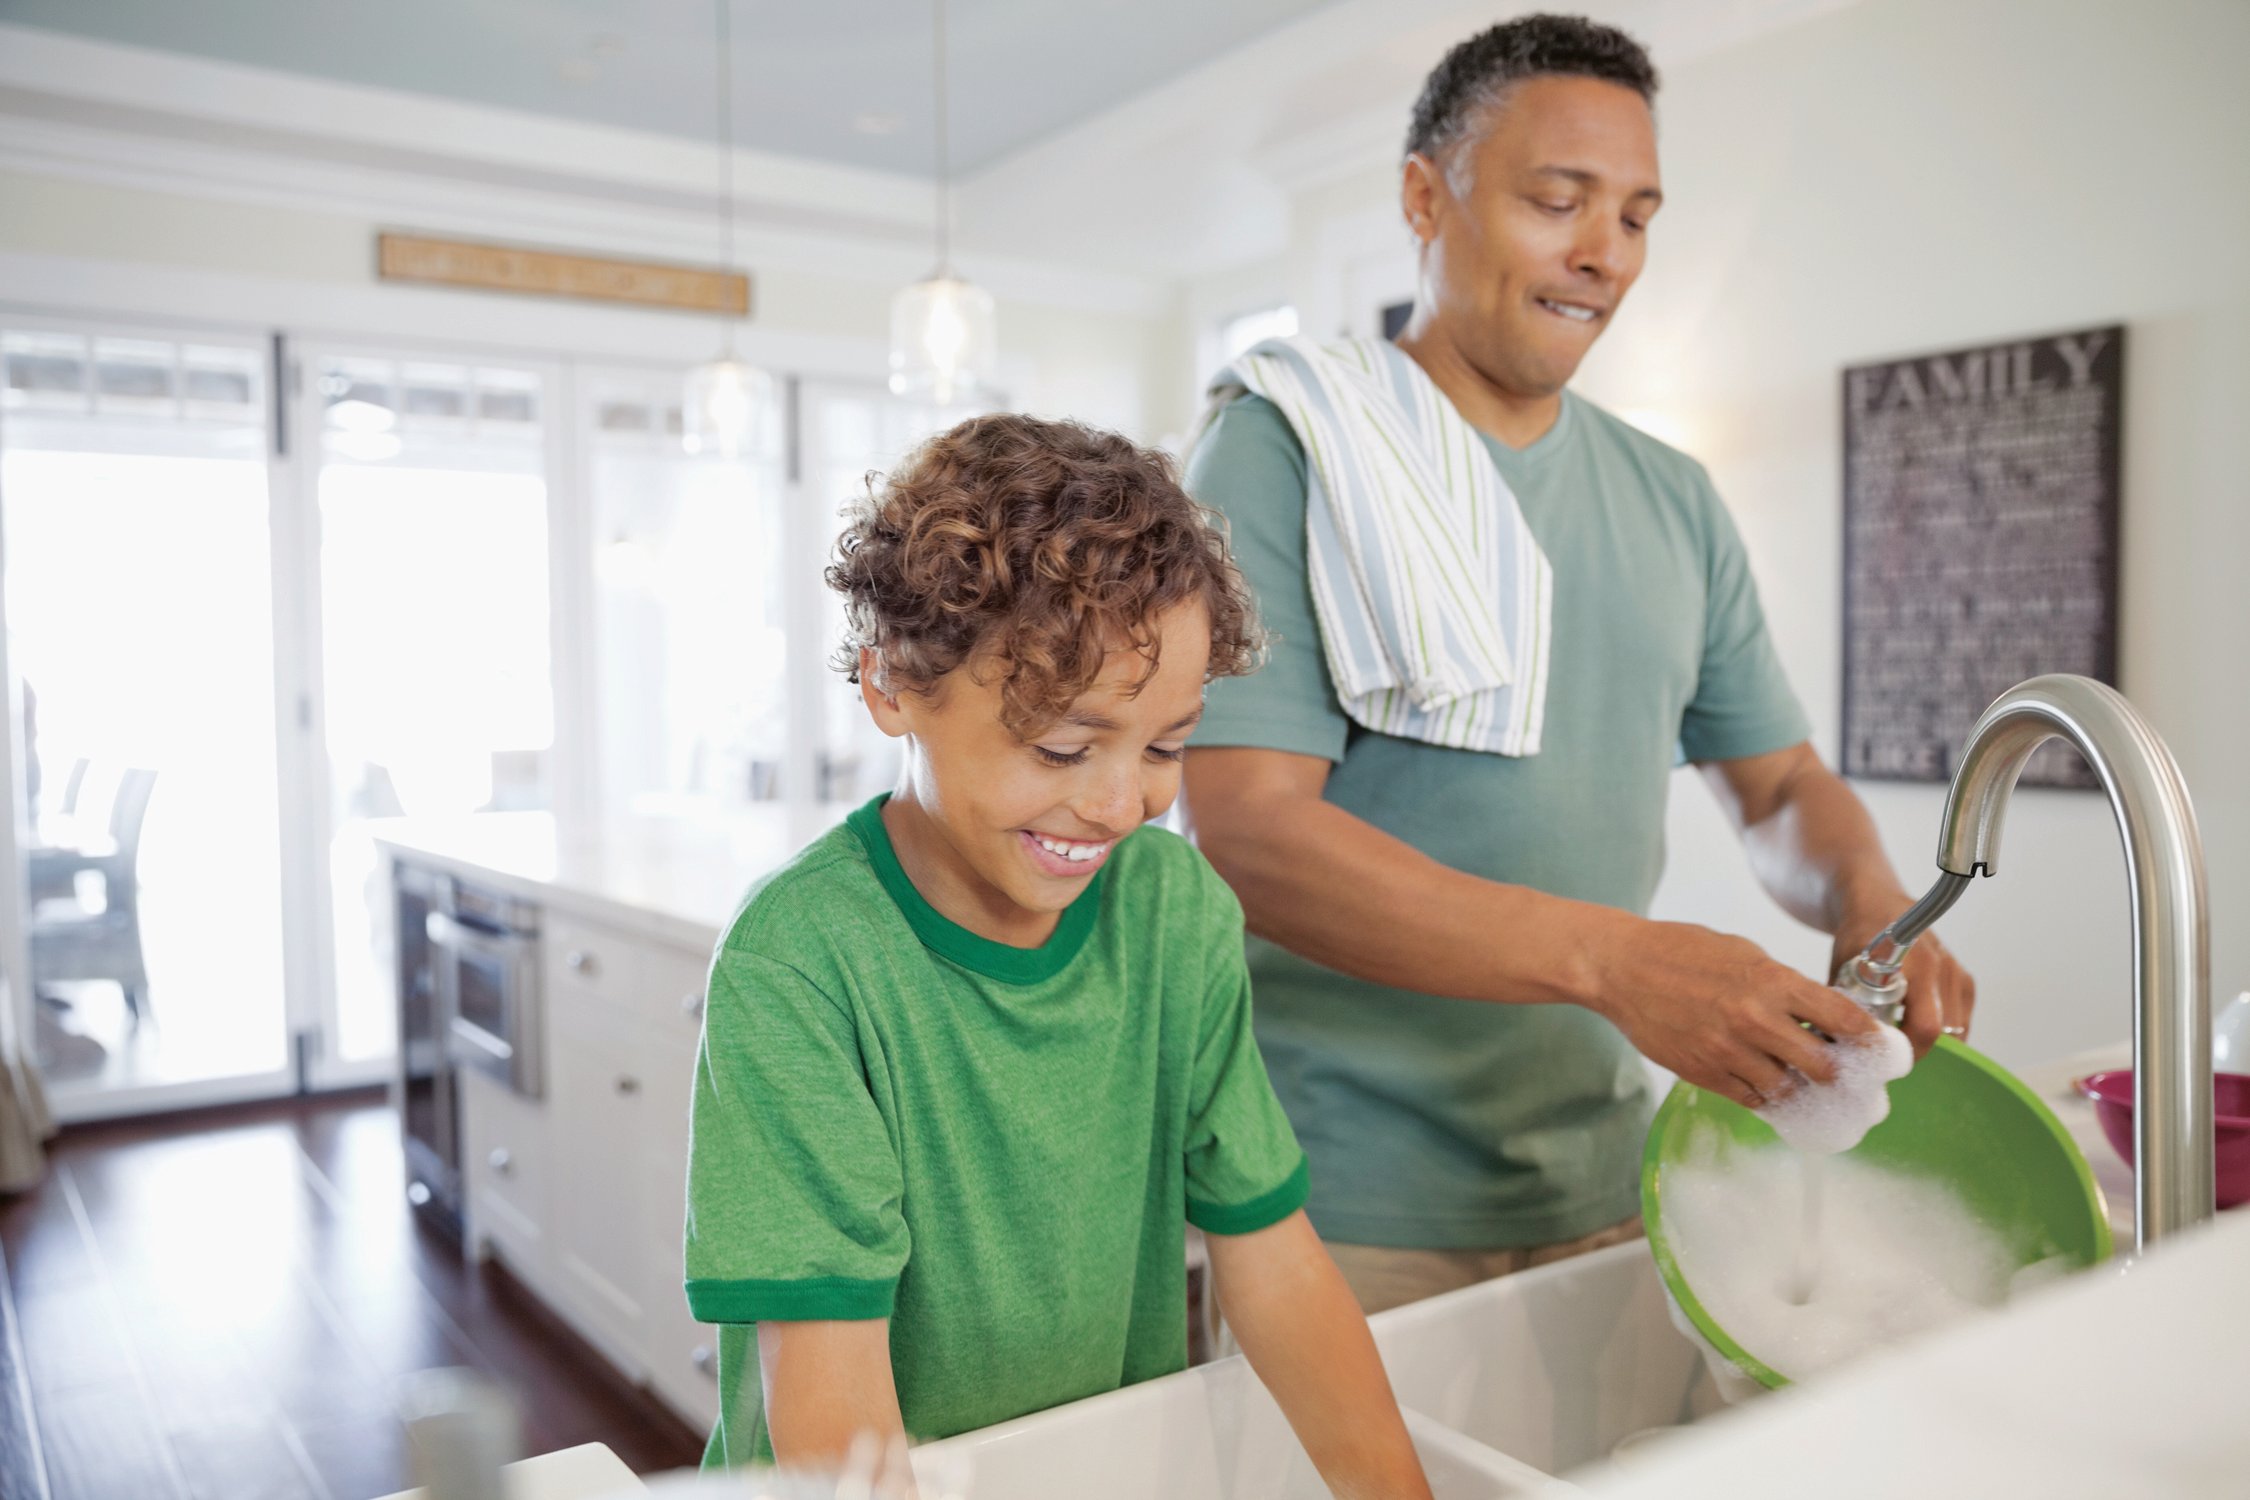 Mature father and son washing dishes together at kitchen sink